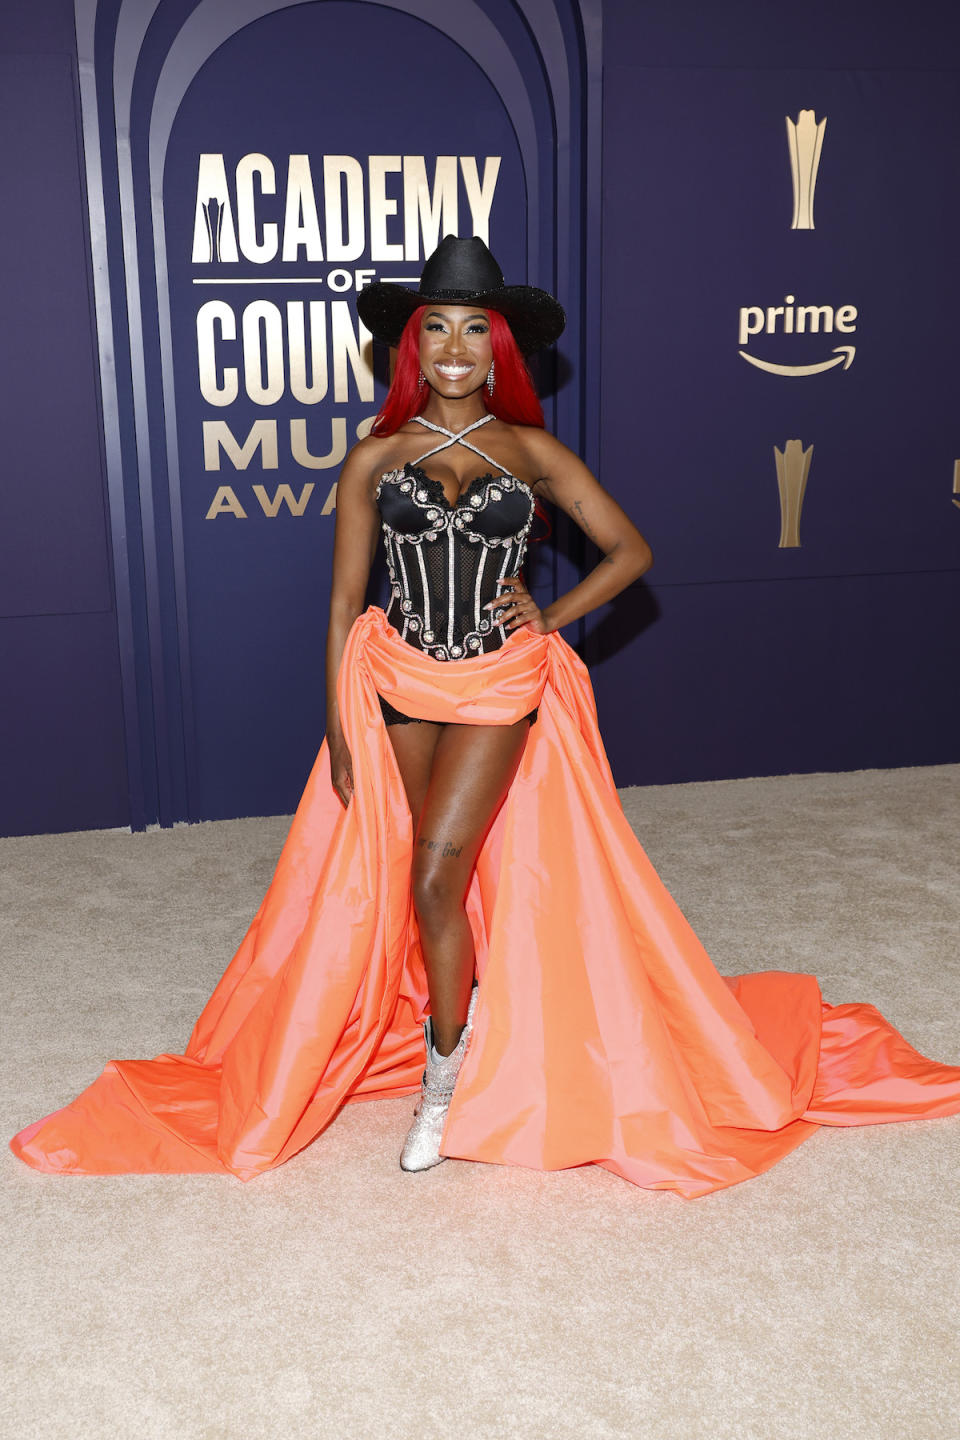 FRISCO, TEXAS - MAY 16: EDITORIAL USE ONLY. Reyna Roberts attends the 59th Academy of Country Music Awards at Omni Frisco Hotel at The Star on May 16, 2024 in Frisco, Texas. (Photo by Jason Kempin/Getty Images)